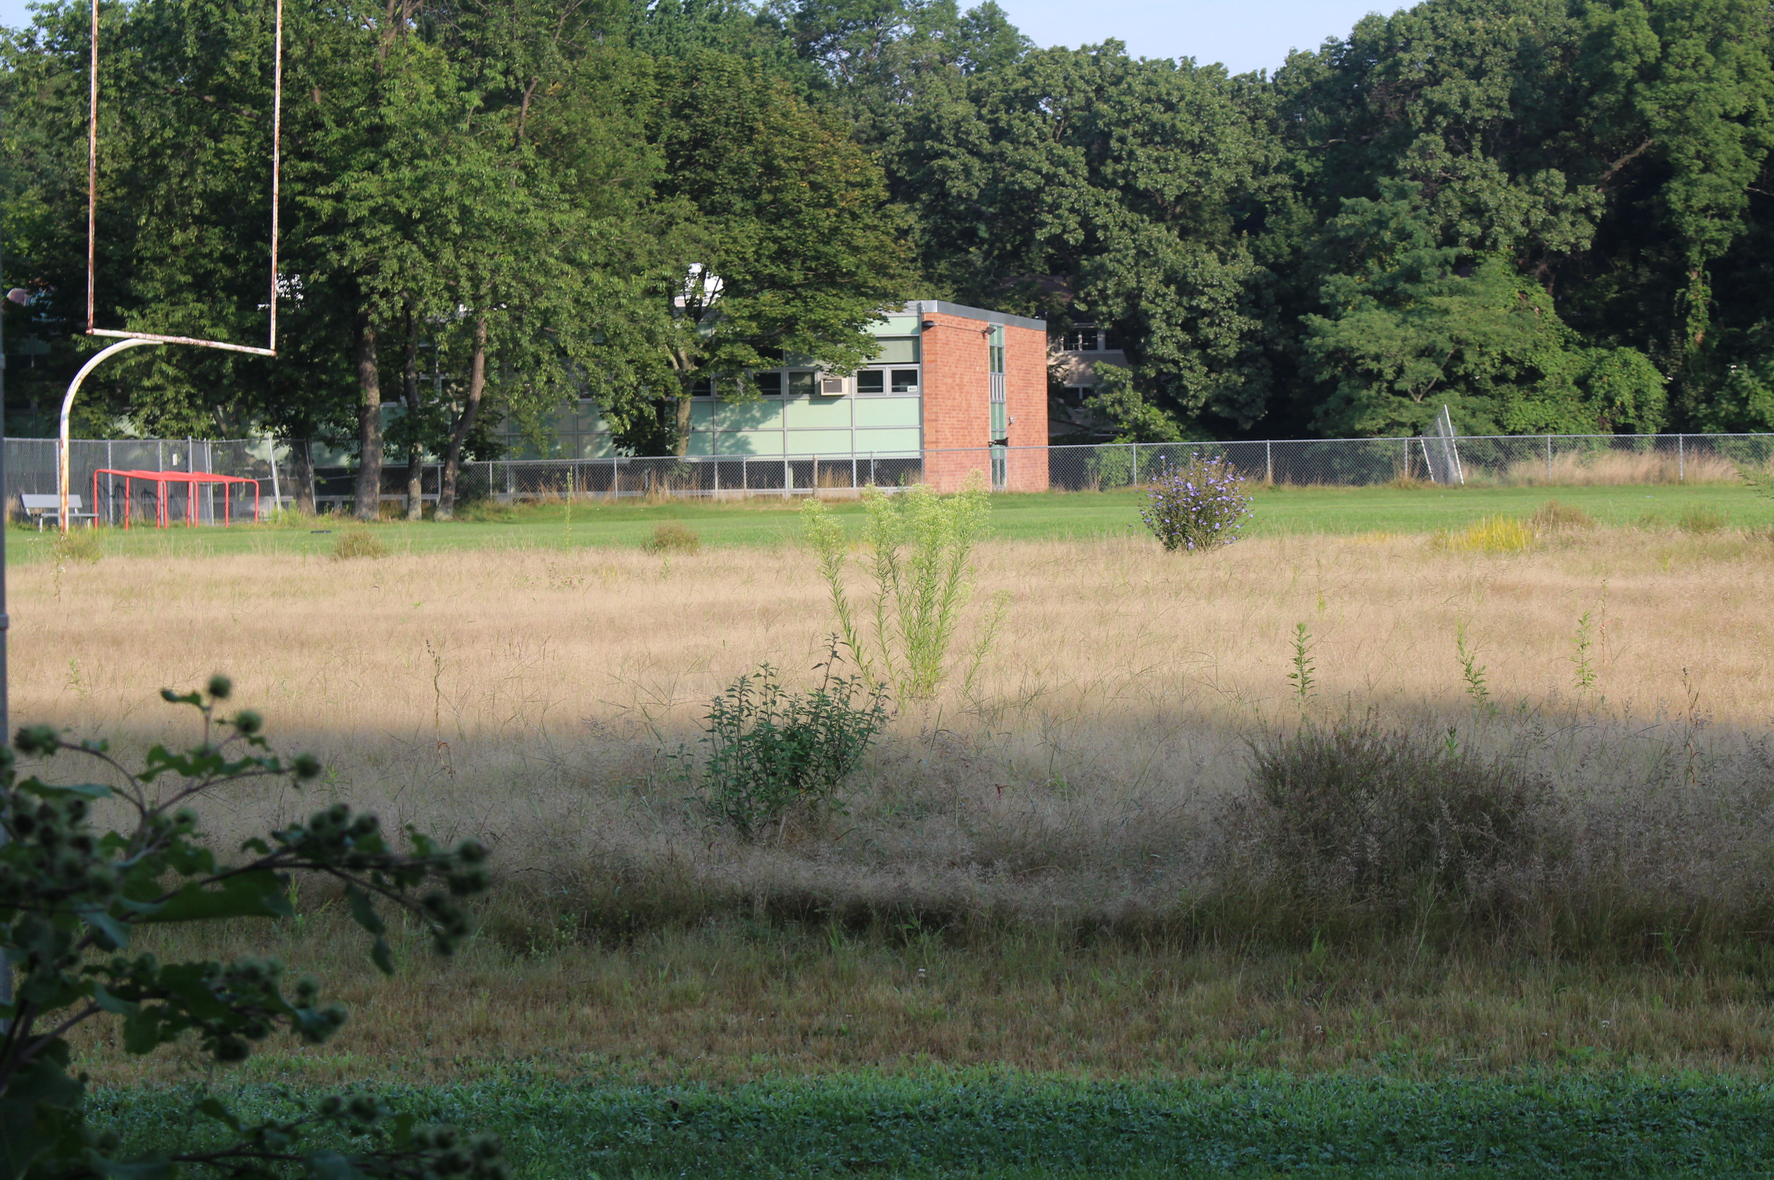 Weeds sprouting at a close off field at Western Middle School. Aug 21, 2017 Photo: Leslie Yager